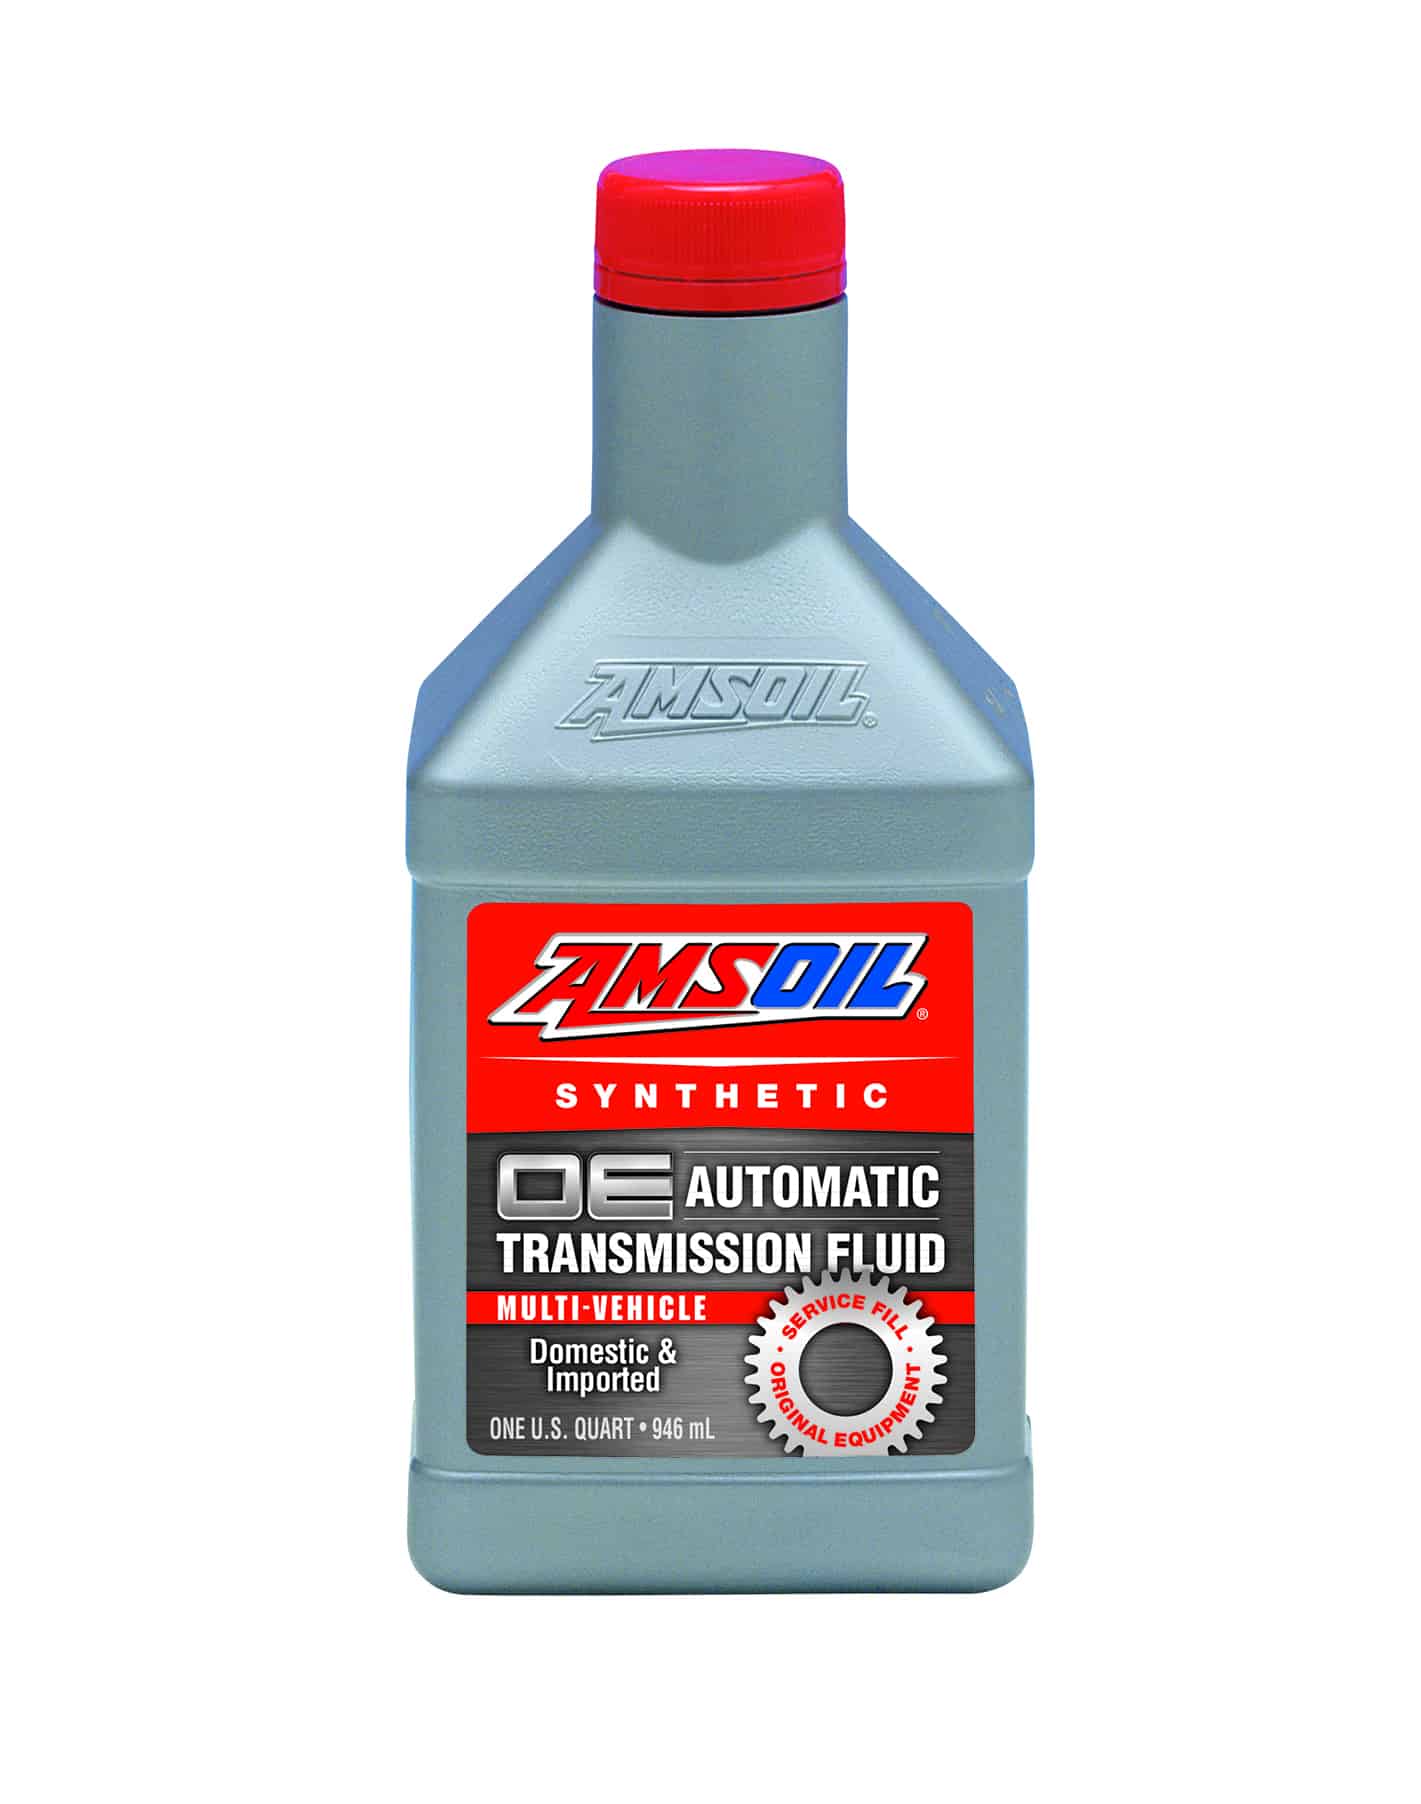 A bottle of AMSOIL OE Synthetic Automatic Transmission Fluid, designed to provide passenger-car/light-truck transmissions excellent wear protection, sludge resistance, etc.